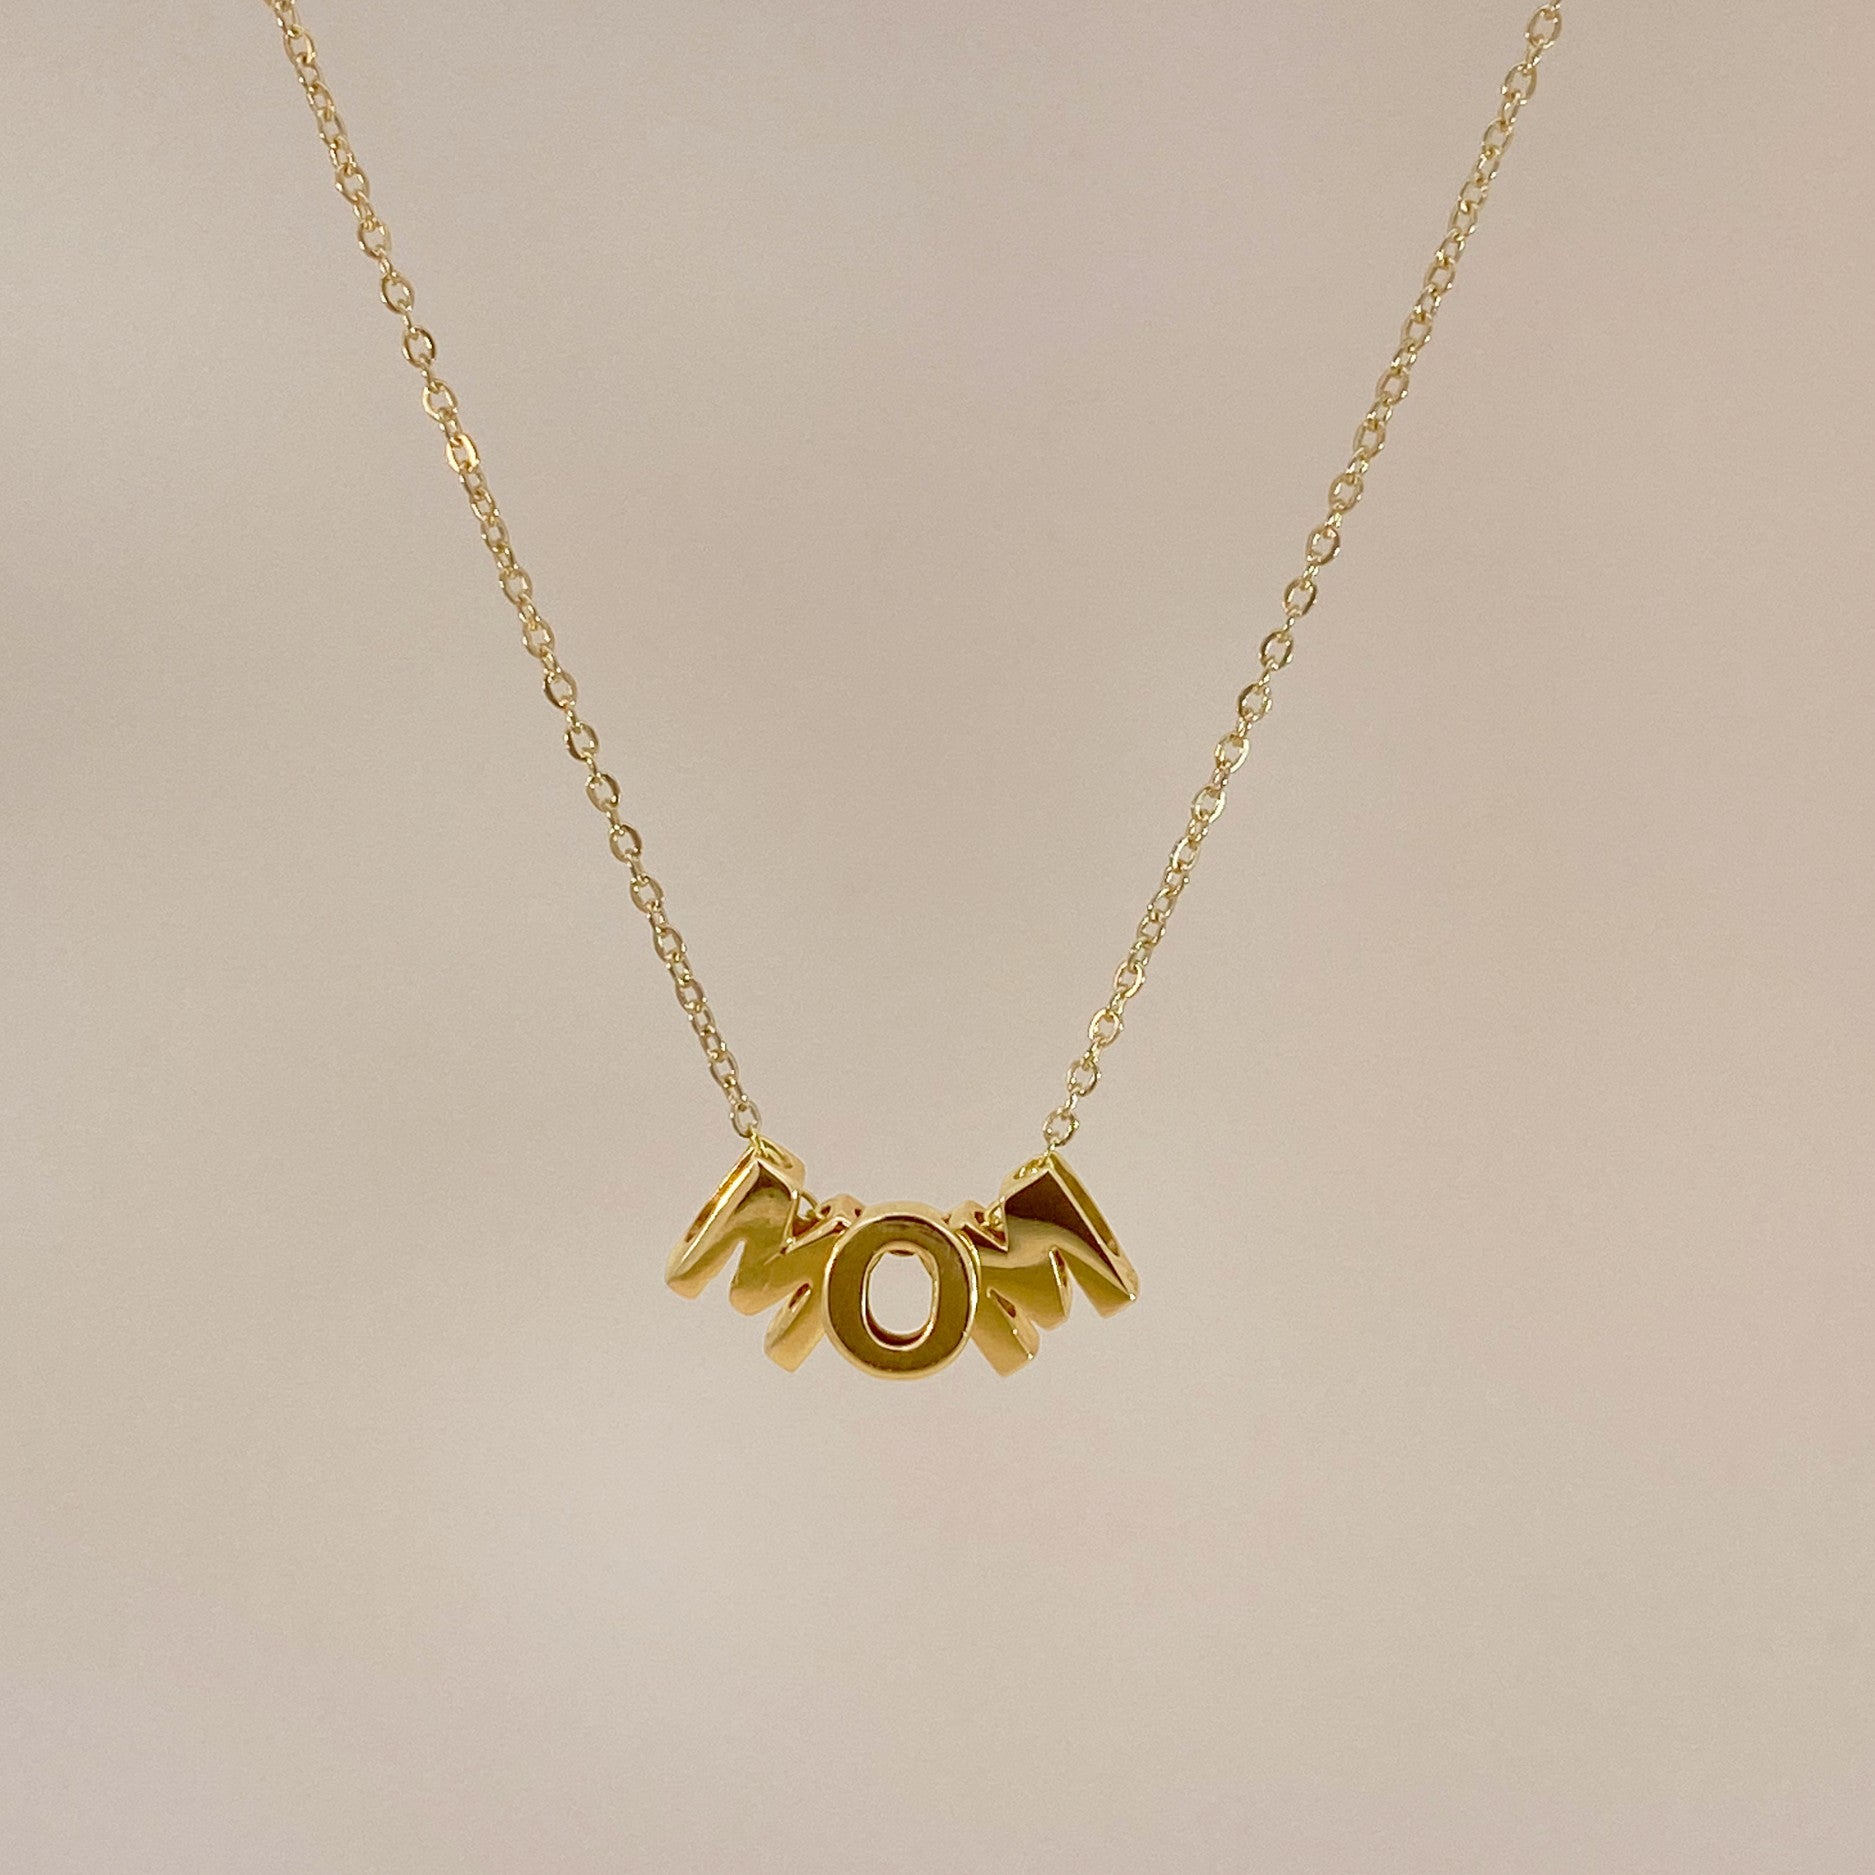 Mom necklace